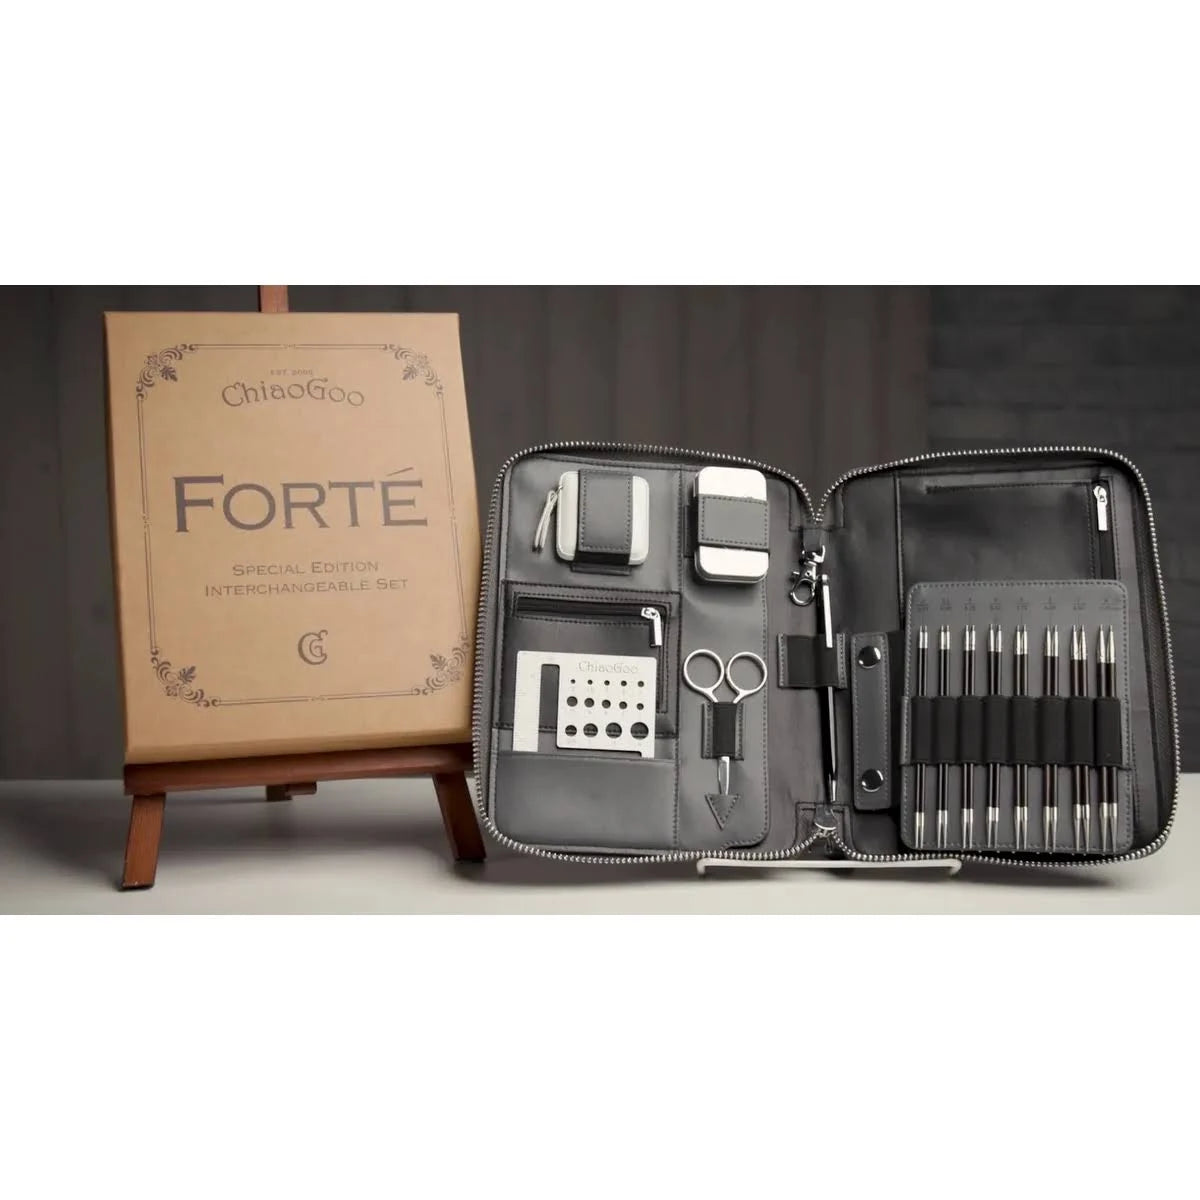 ChiaoGoo Forte 2.0 Interchangeable Needle Set - Special Edition